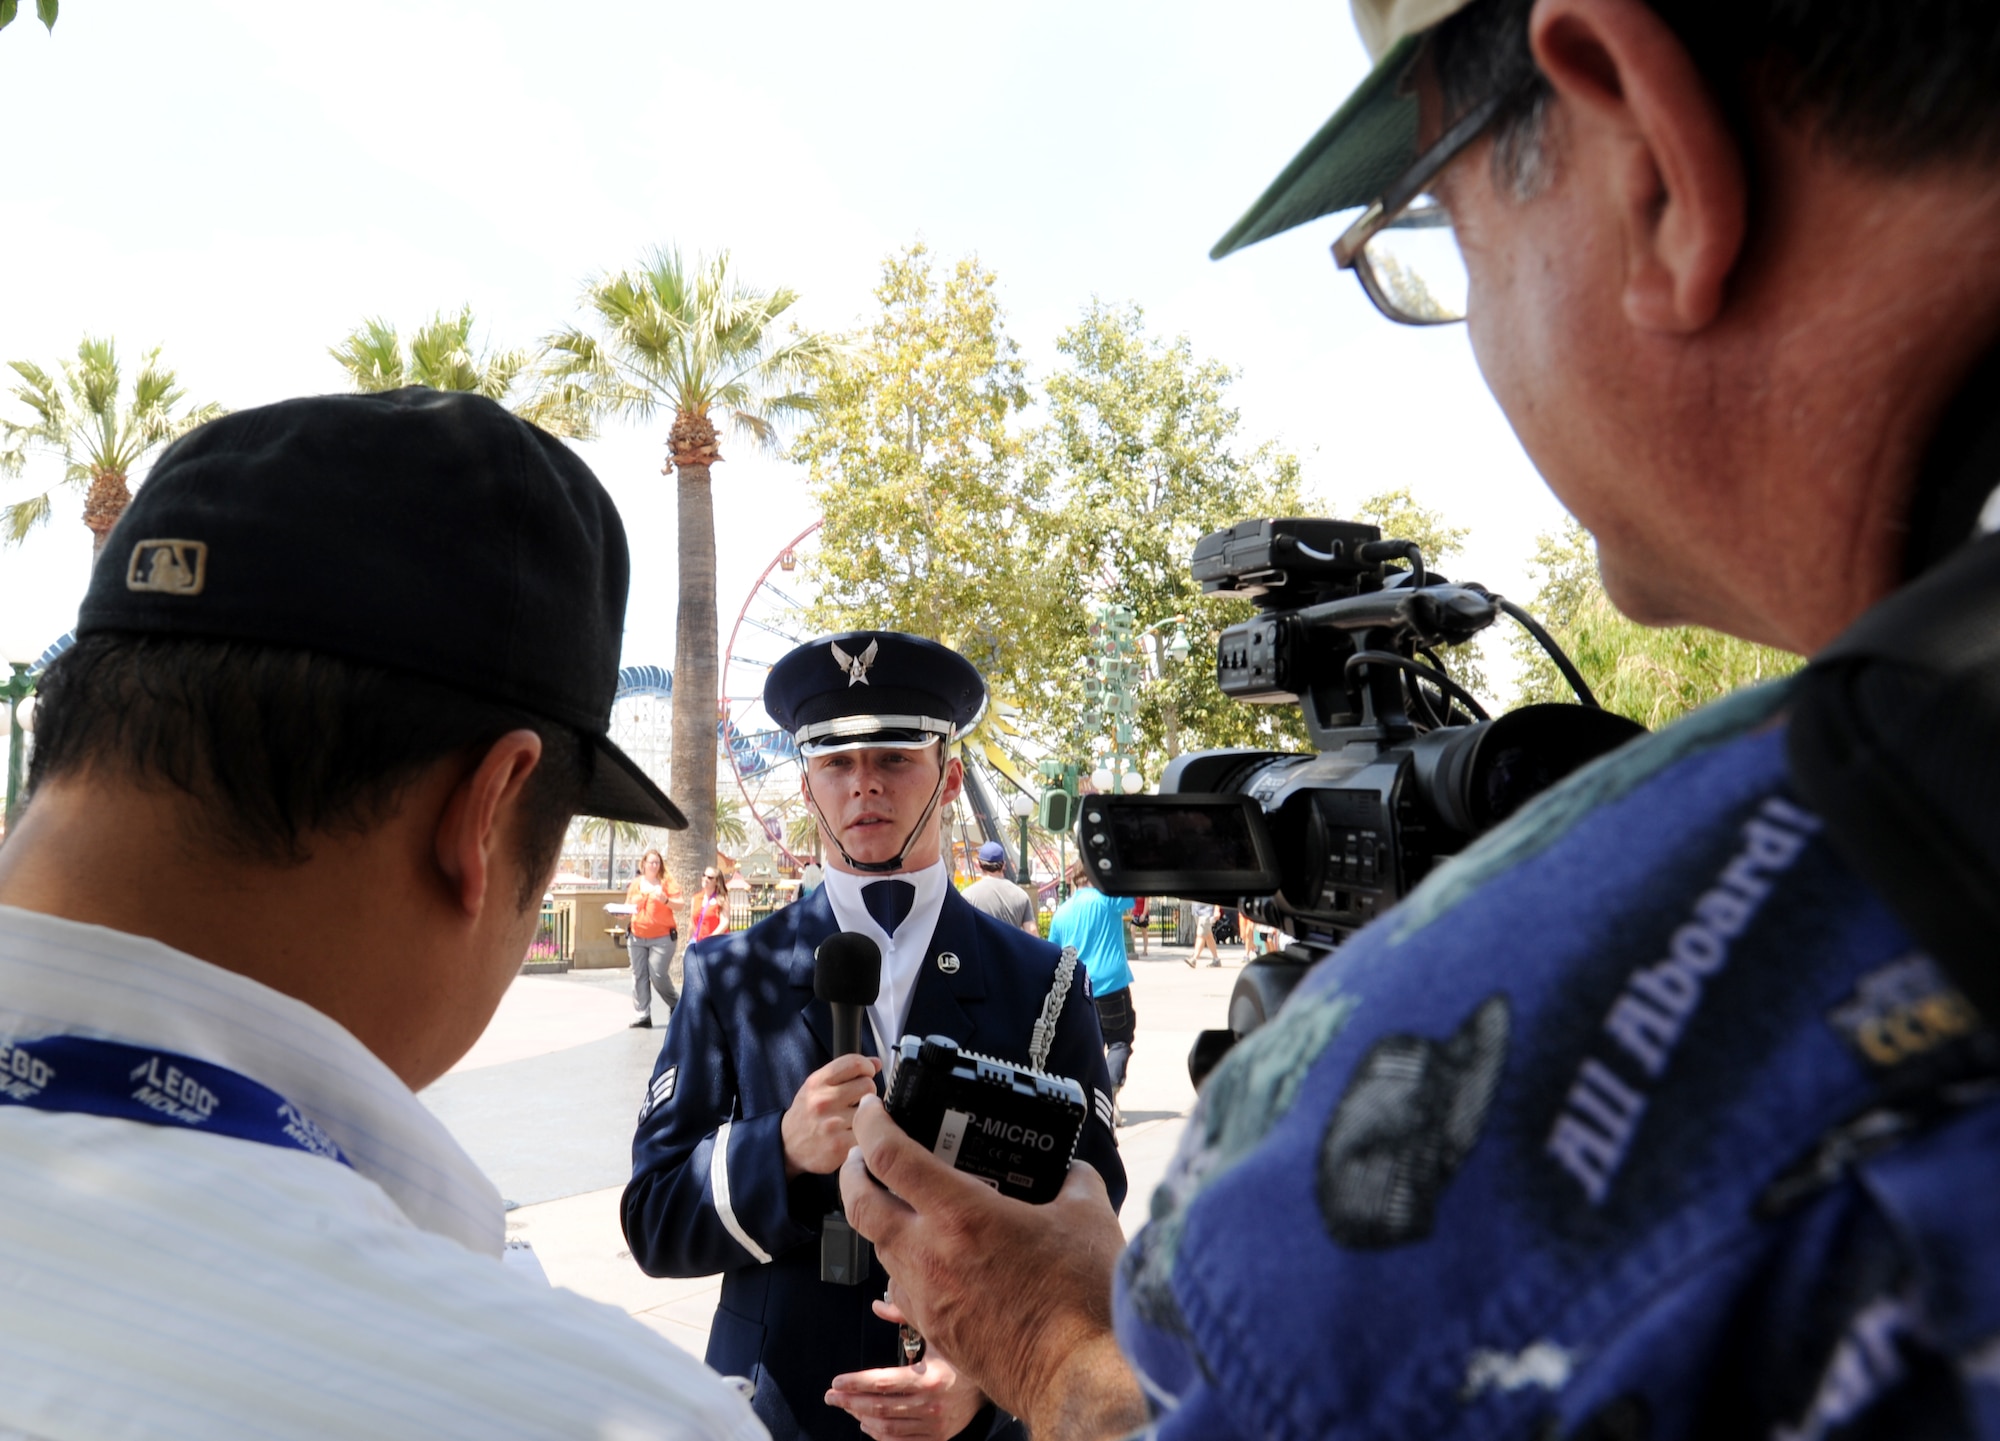 Senior Airman Christopher Horton, Unites States Air Force Honor Guard drill team member, is interviewed by local reporters after a performance at Disney's California Adventure Park in Anaheim, Calif., July 2, 2015. Horton is an Orange County native and has been in the honor guard for two years. (U.S. Air Force photo/ Staff Sgt. Nichelle Anderson)